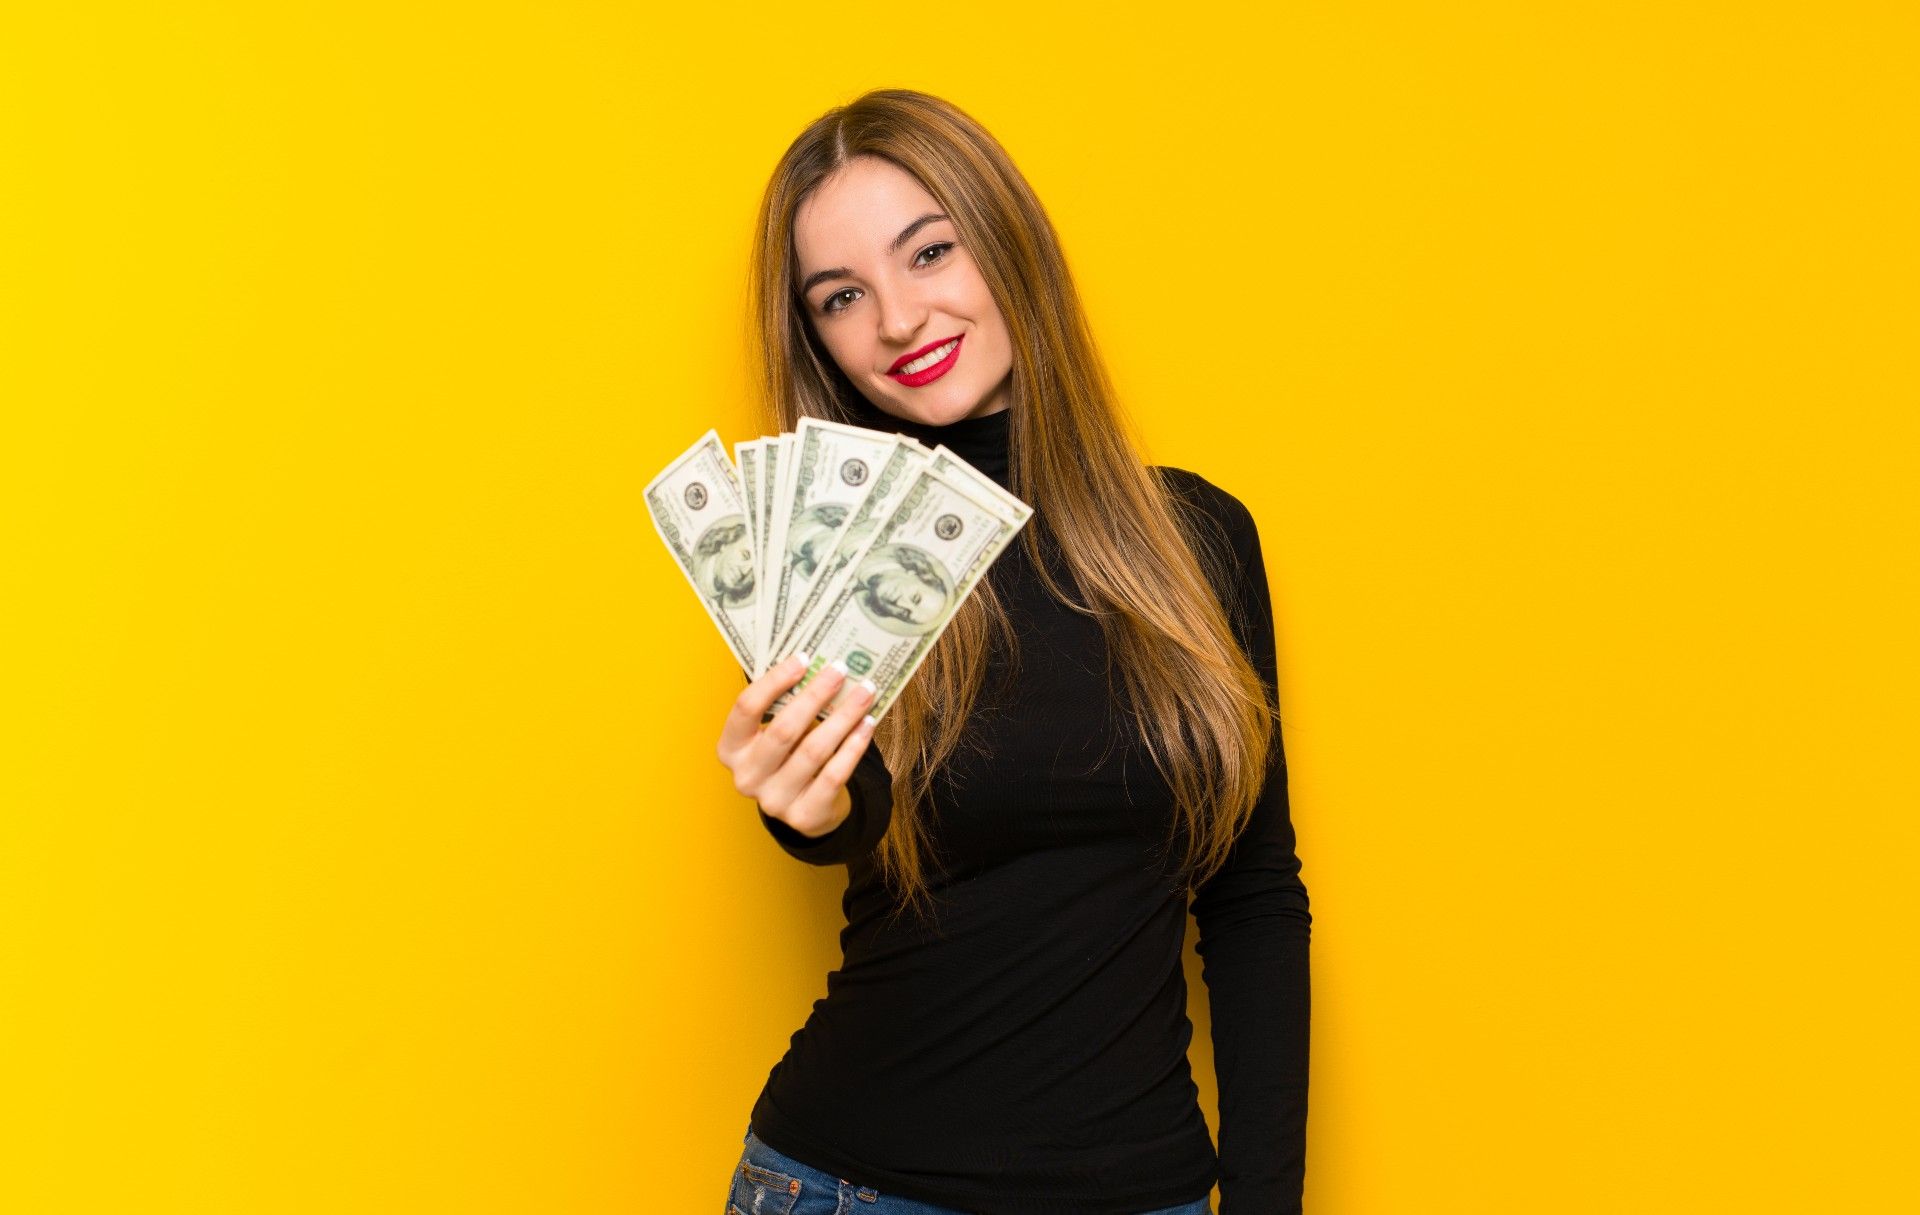 A long-haired woman in a black turtleneck holds fanned-out cash up to the camera while standing against a yellow background